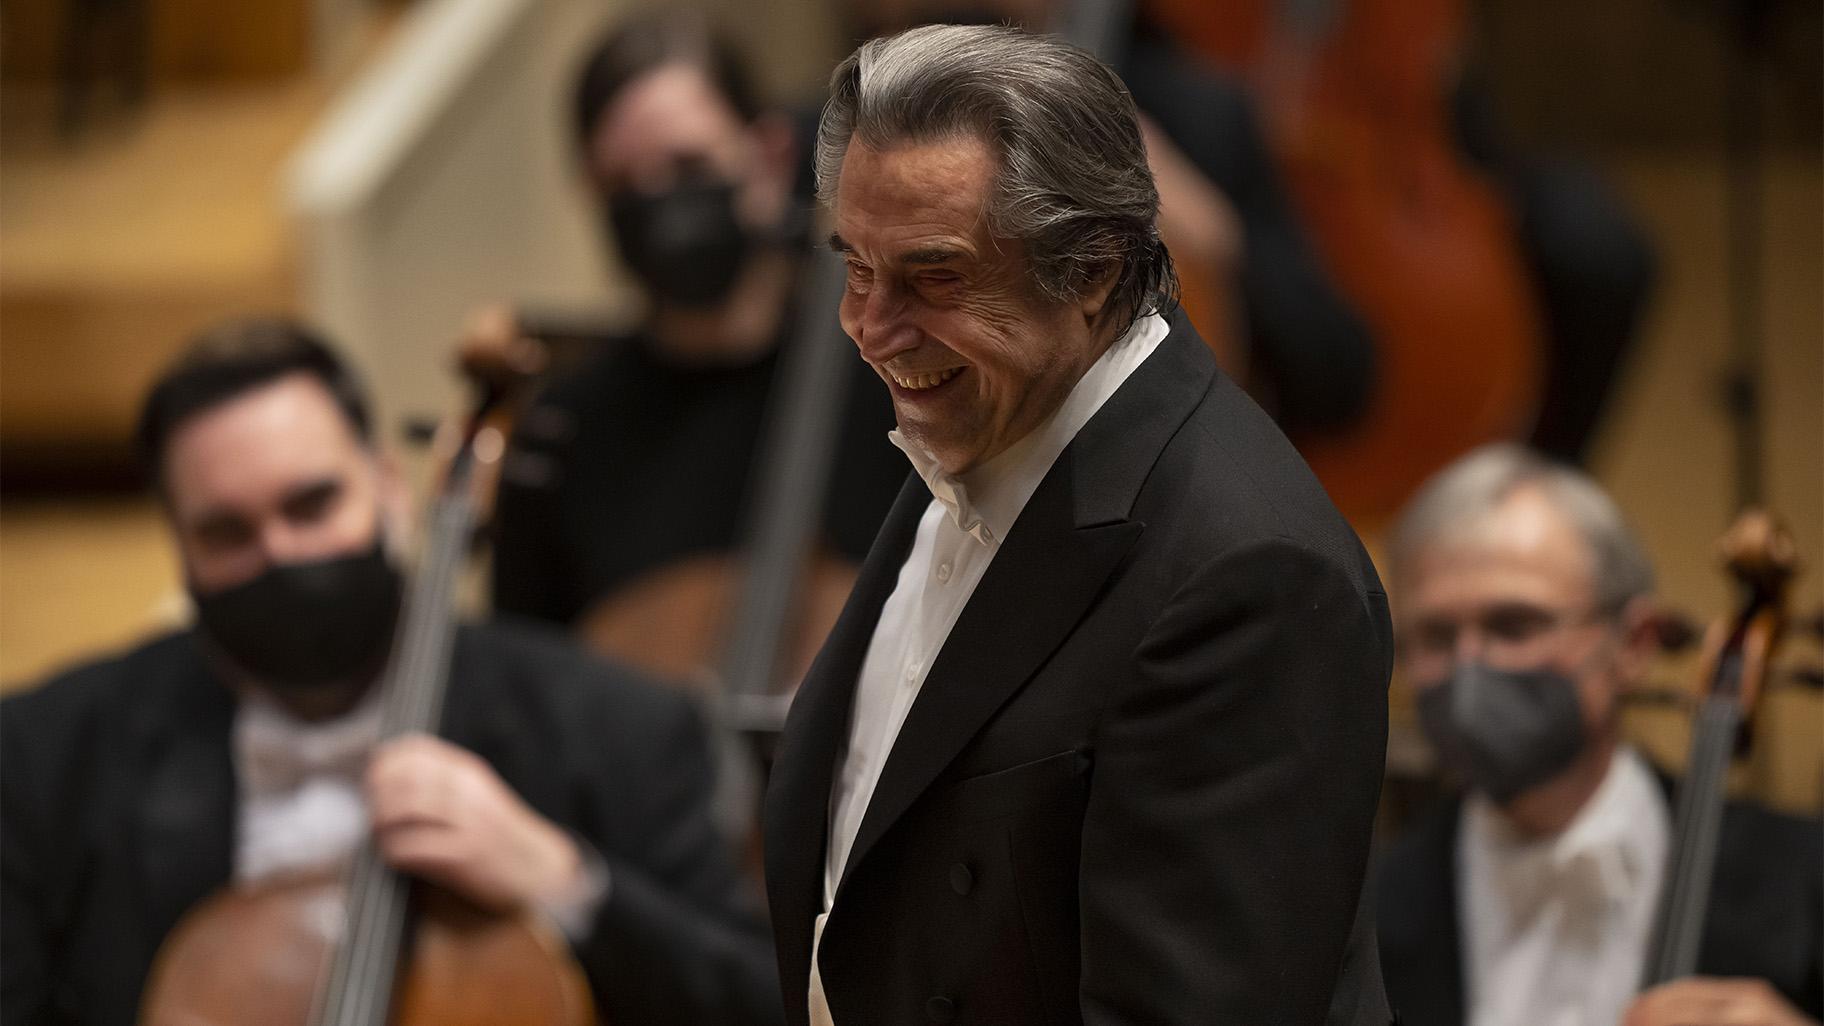 Zell Music Director Riccardo Muti acknowledges the Chicago Symphony Orchestra following a performance of an all-Beethoven program on January 13, 2022. (Credit Todd Rosenberg Photography)